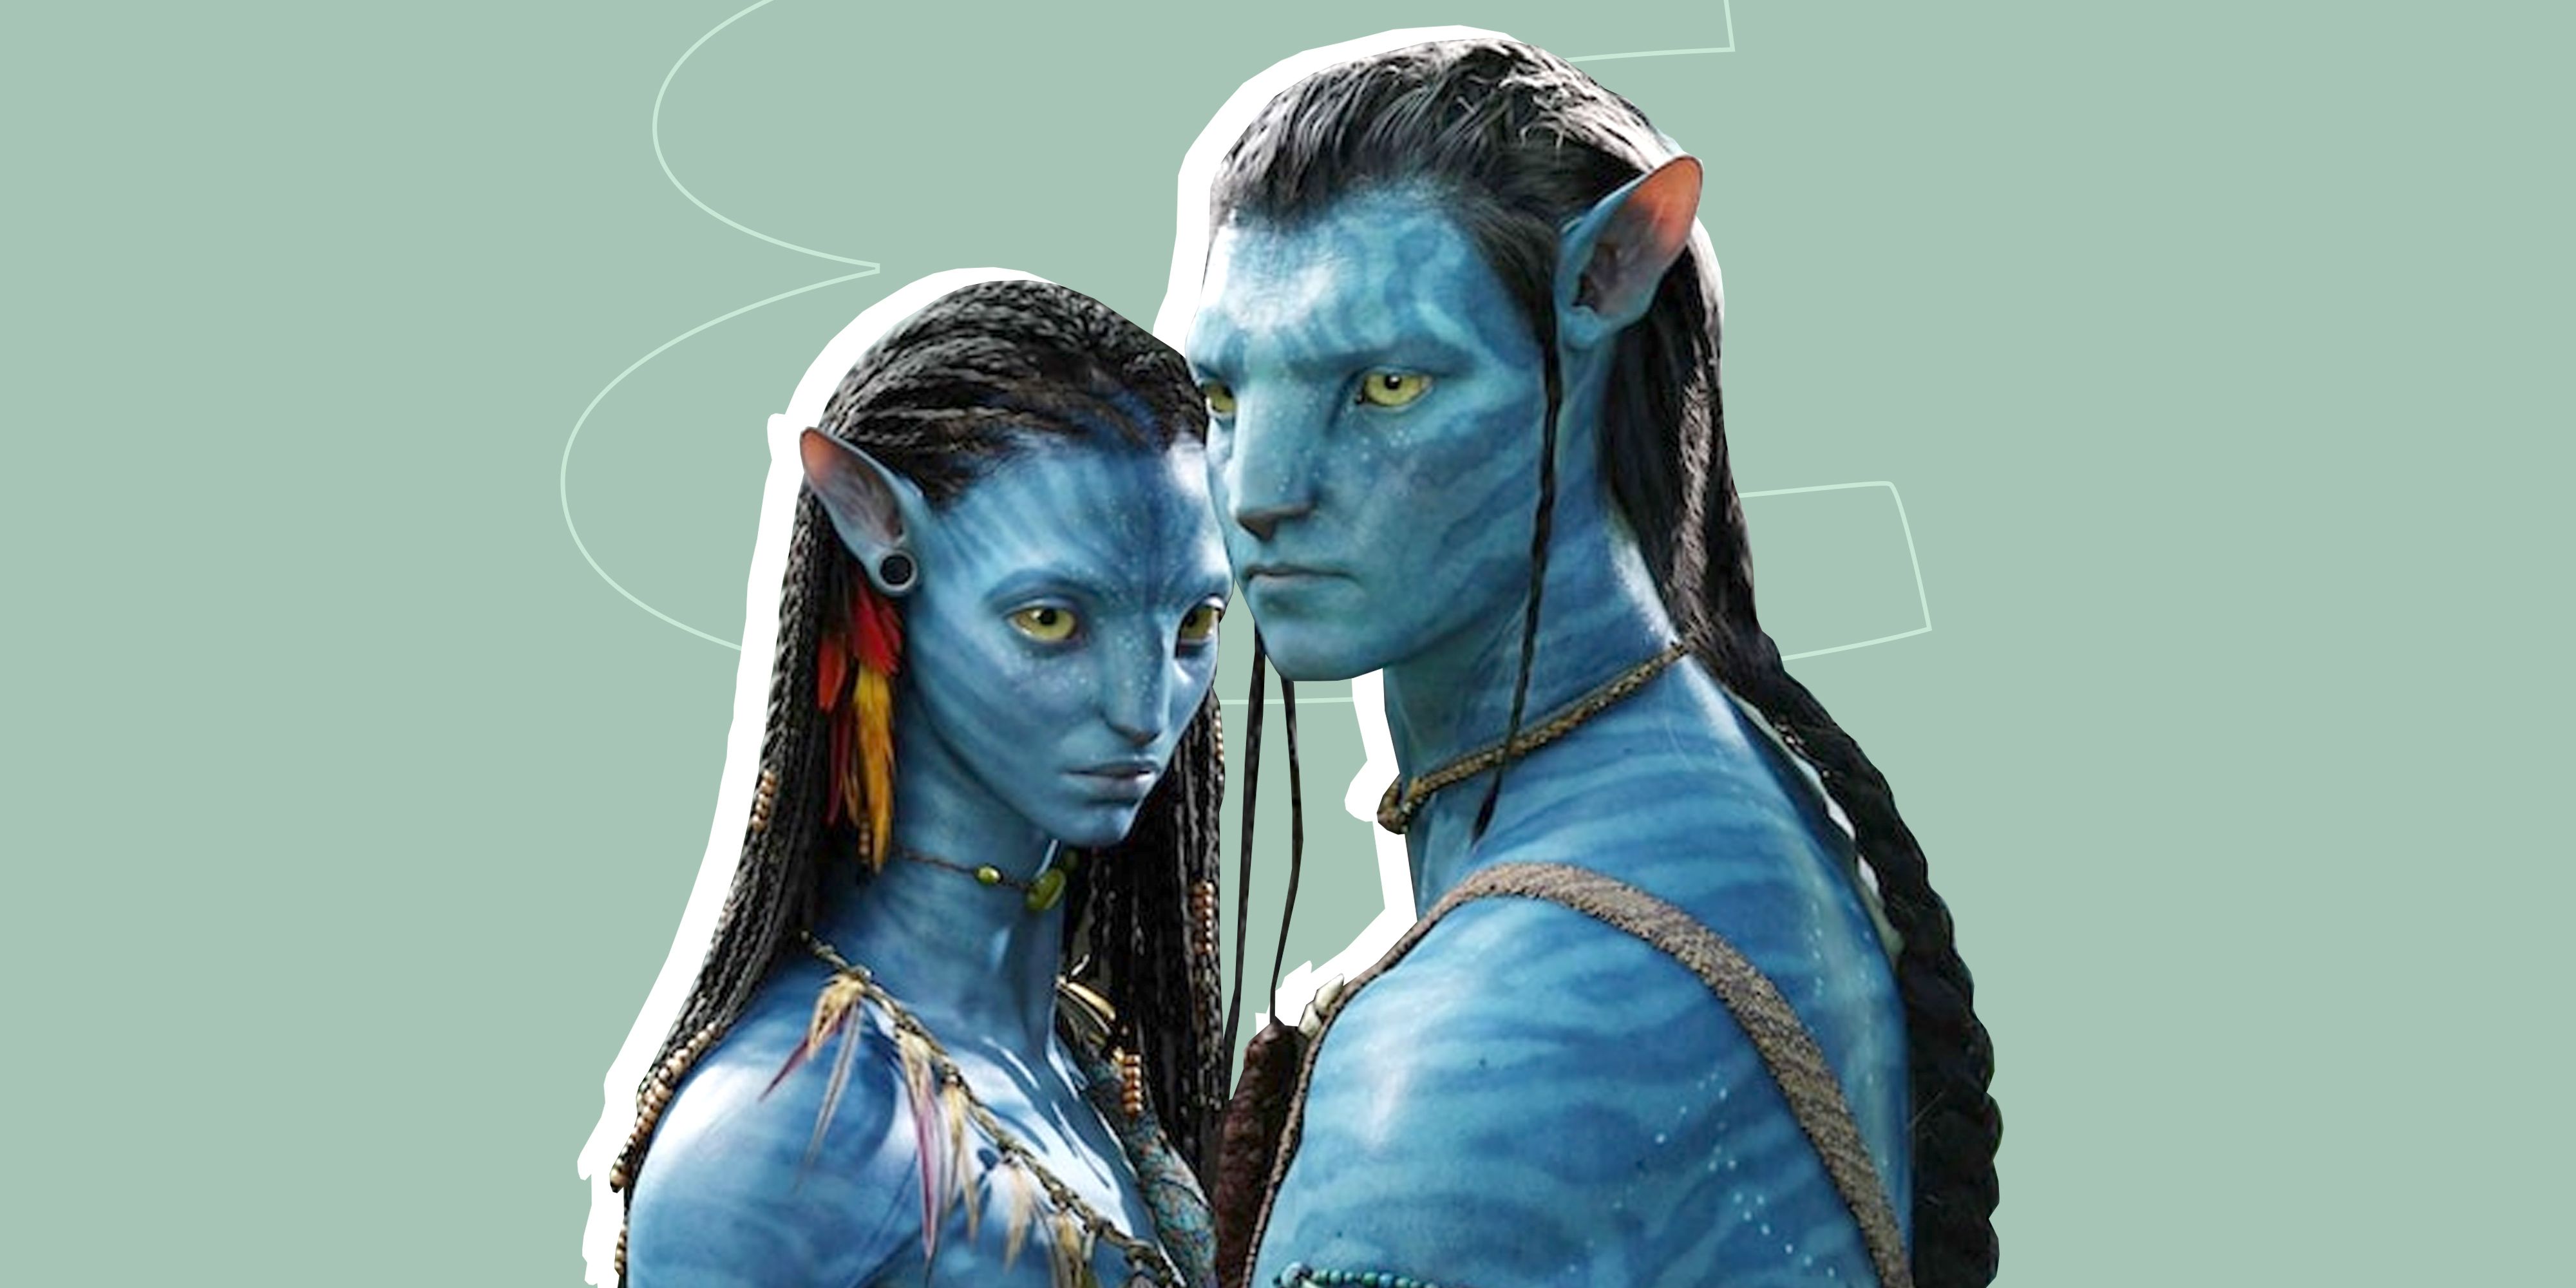 Is Avatar The Way of Water on Netflix where to watch the Avatar sequel